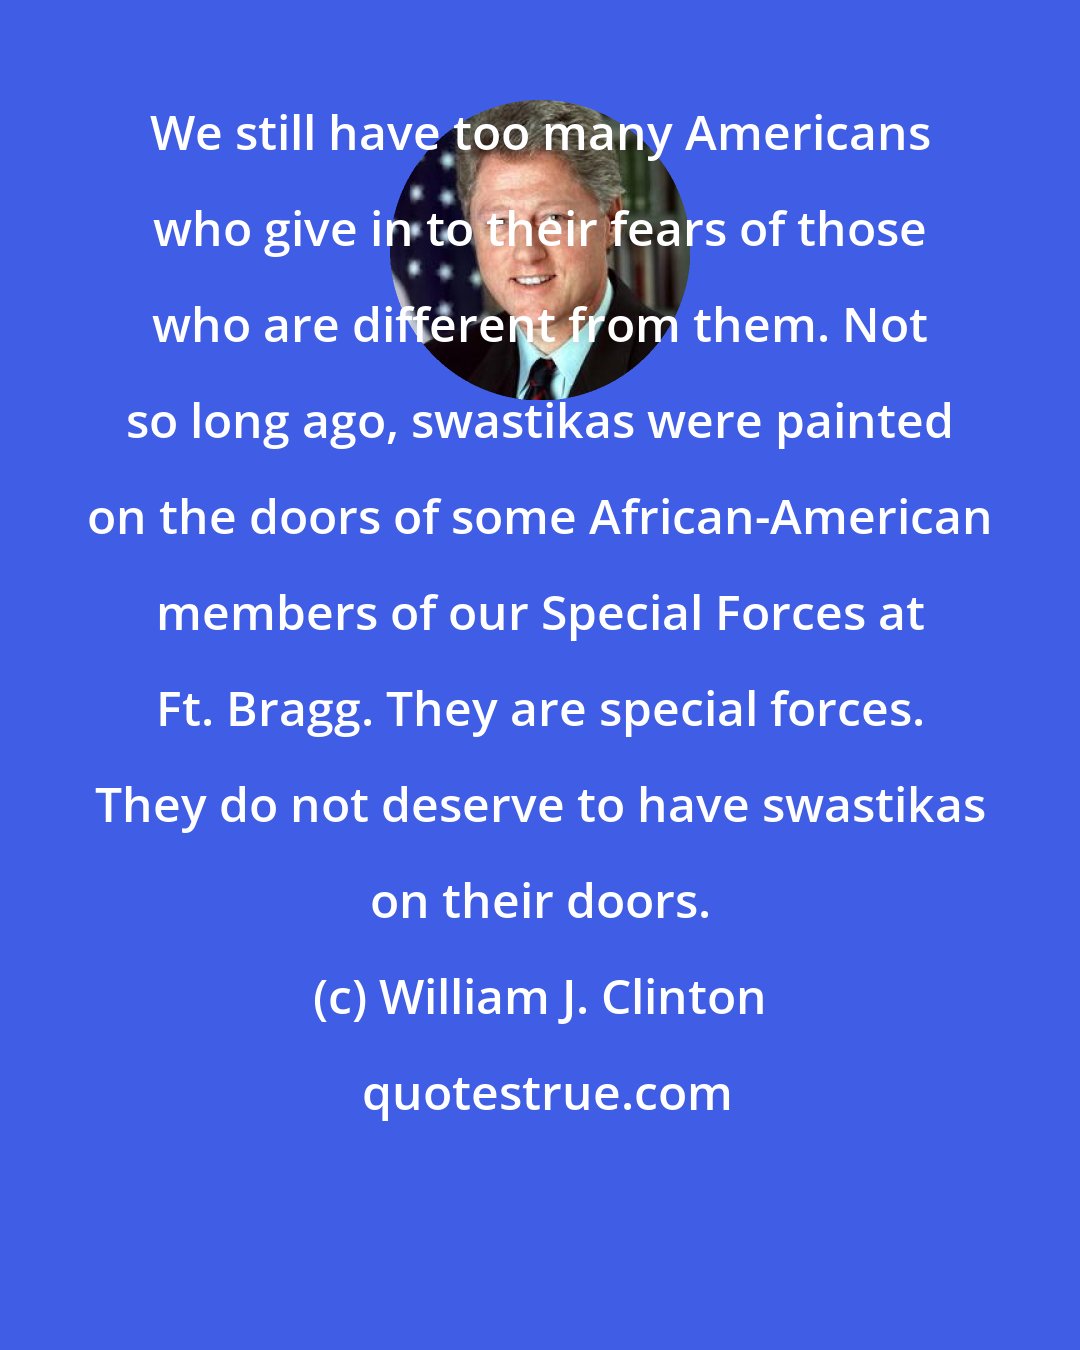 William J. Clinton: We still have too many Americans who give in to their fears of those who are different from them. Not so long ago, swastikas were painted on the doors of some African-American members of our Special Forces at Ft. Bragg. They are special forces. They do not deserve to have swastikas on their doors.